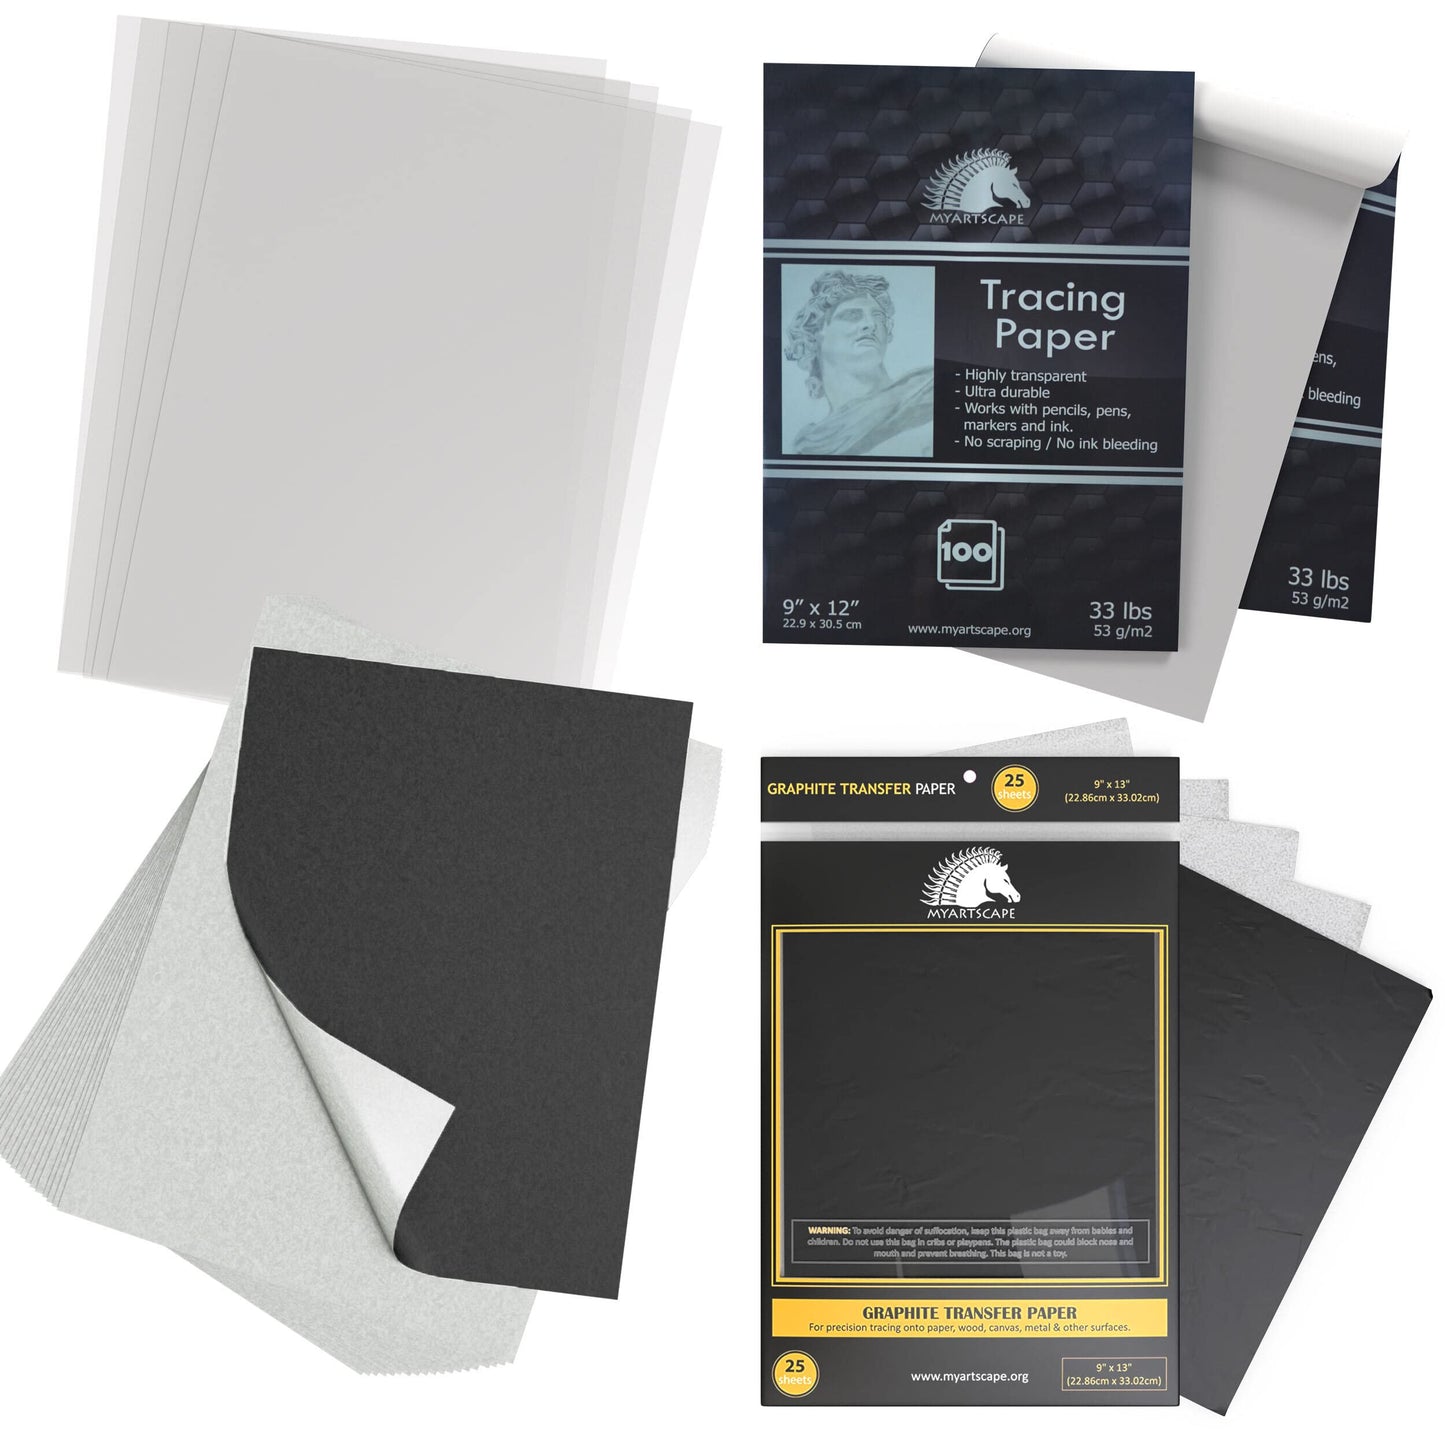 Graphite Transfer Paper - 9 x 13 - 50 Sheets - Waxed Carbon Paper for  Tracing - MyArtscape (Black)